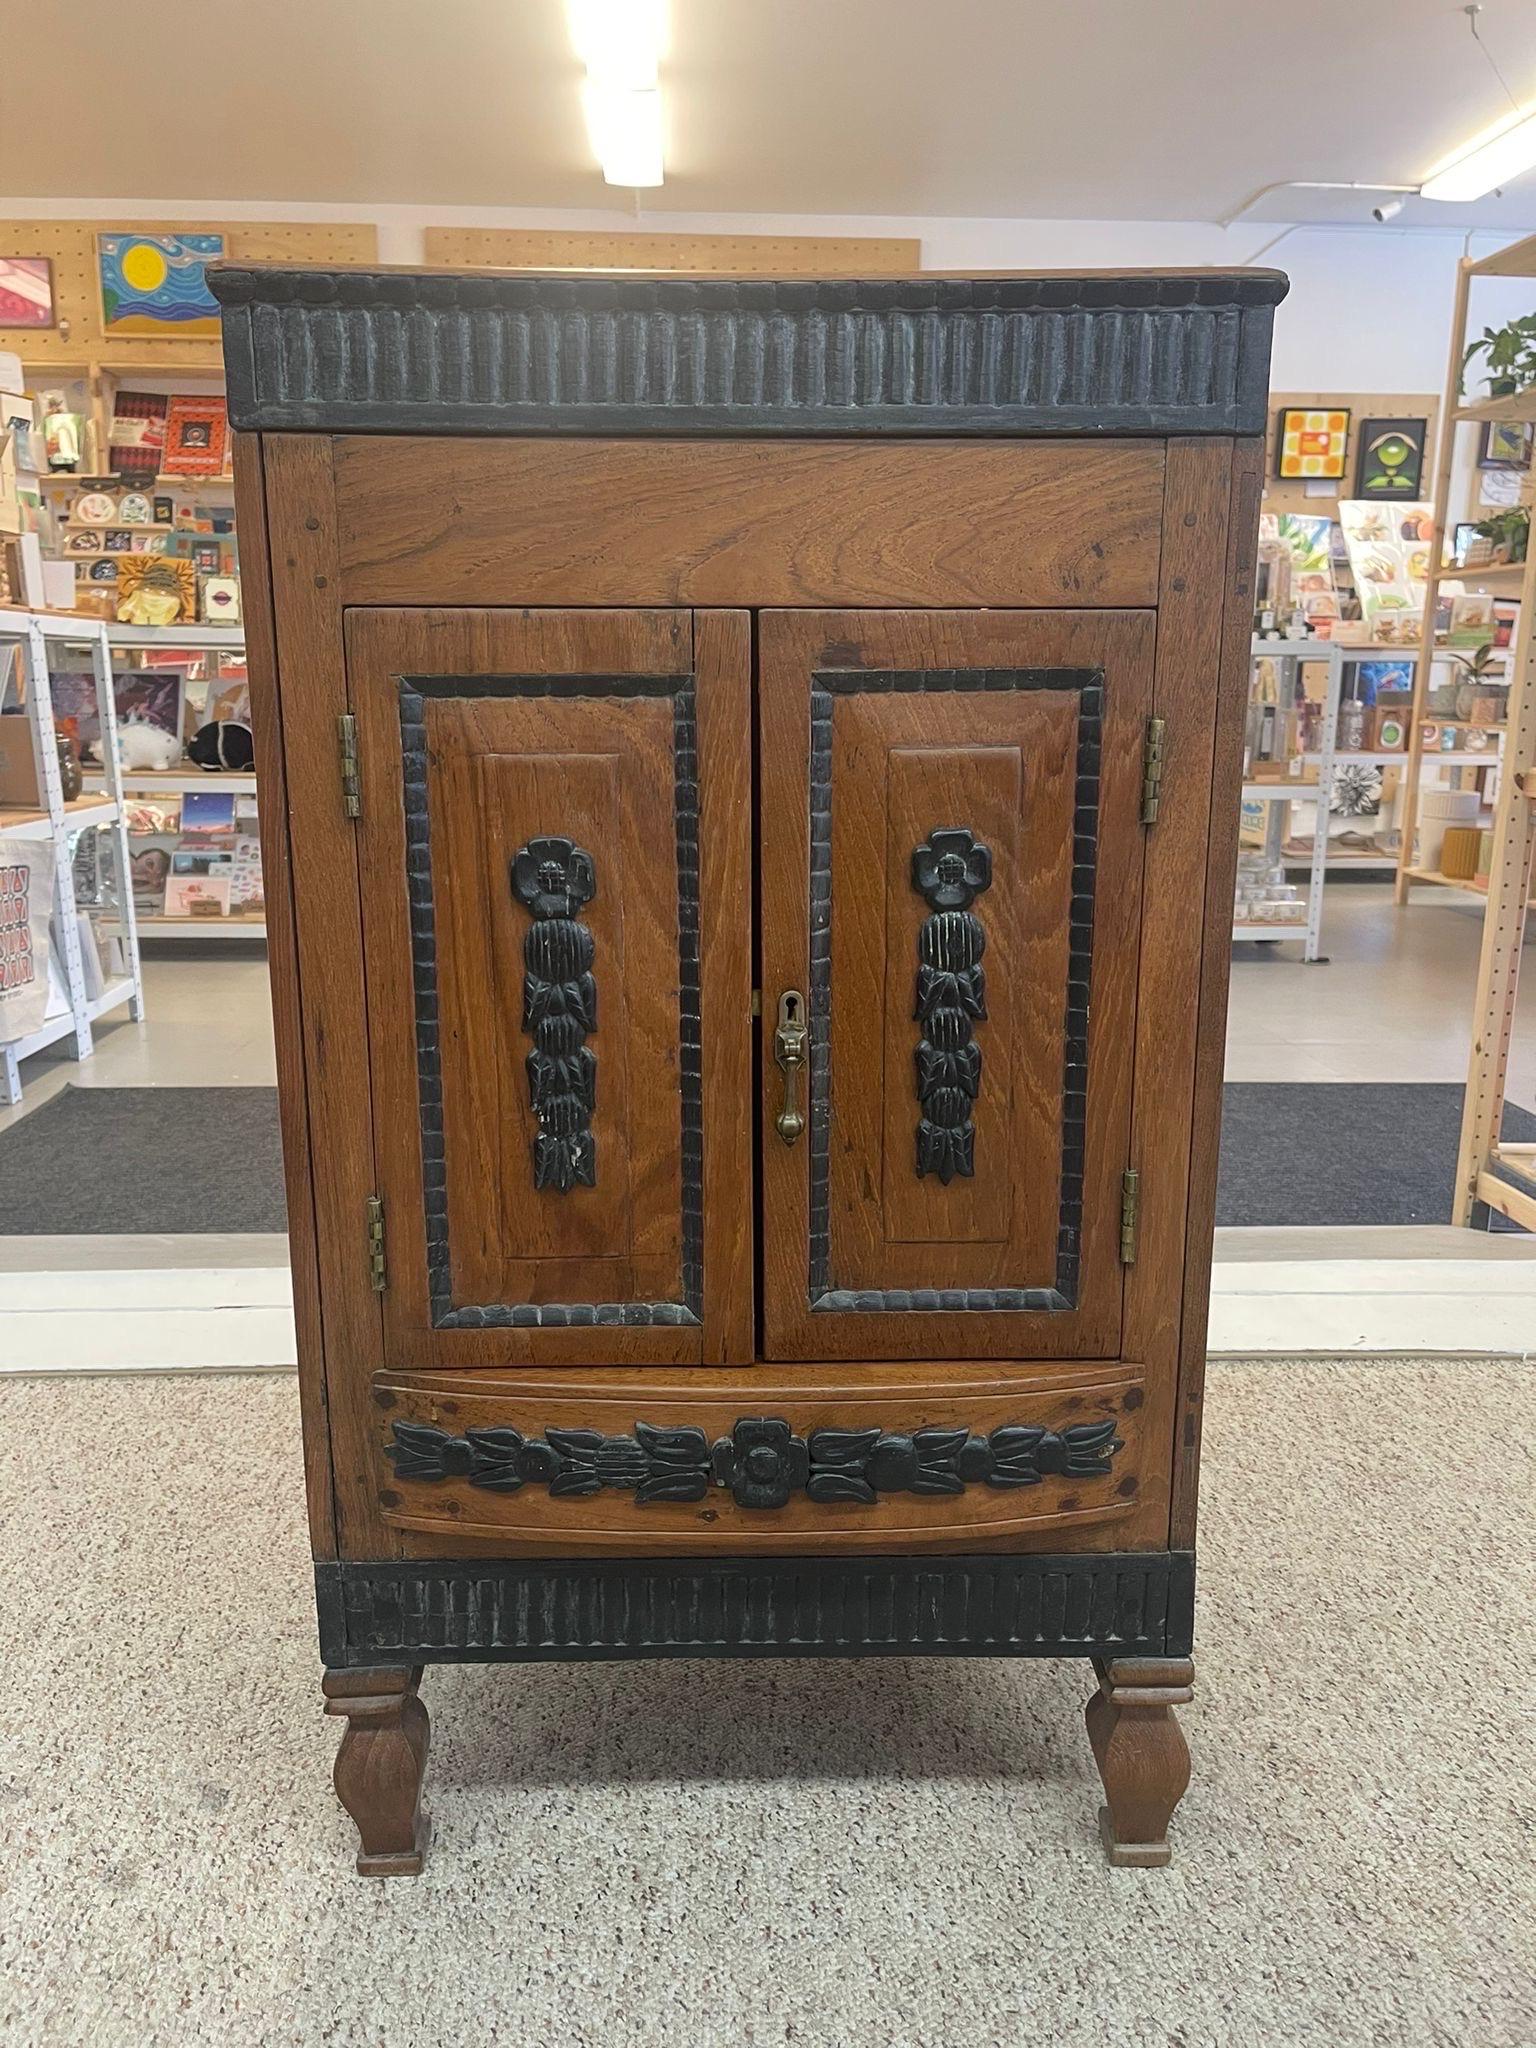 This Dutch colonial cabinet opens from the top, front and back as shown. Every side is enhanced with Carved wood Floral detailing and lining. Carved wood legs. Hardware is original. Vintage Condition Consistent with Age as Pictured.

Dimensions. 21